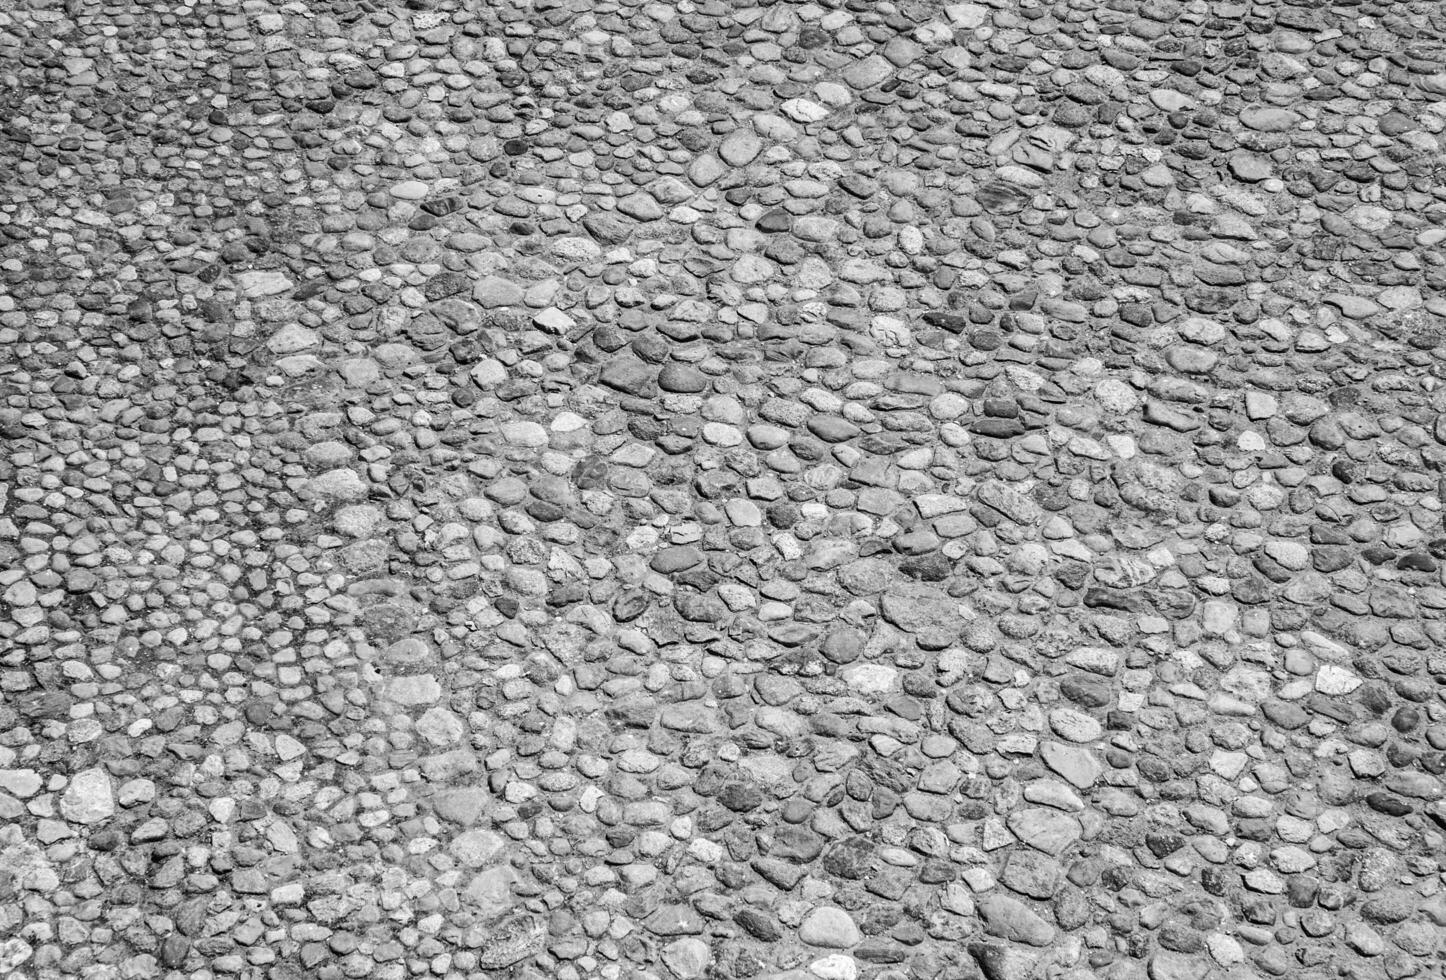 An old stone wall texture, black and white stone pattern surface background photo